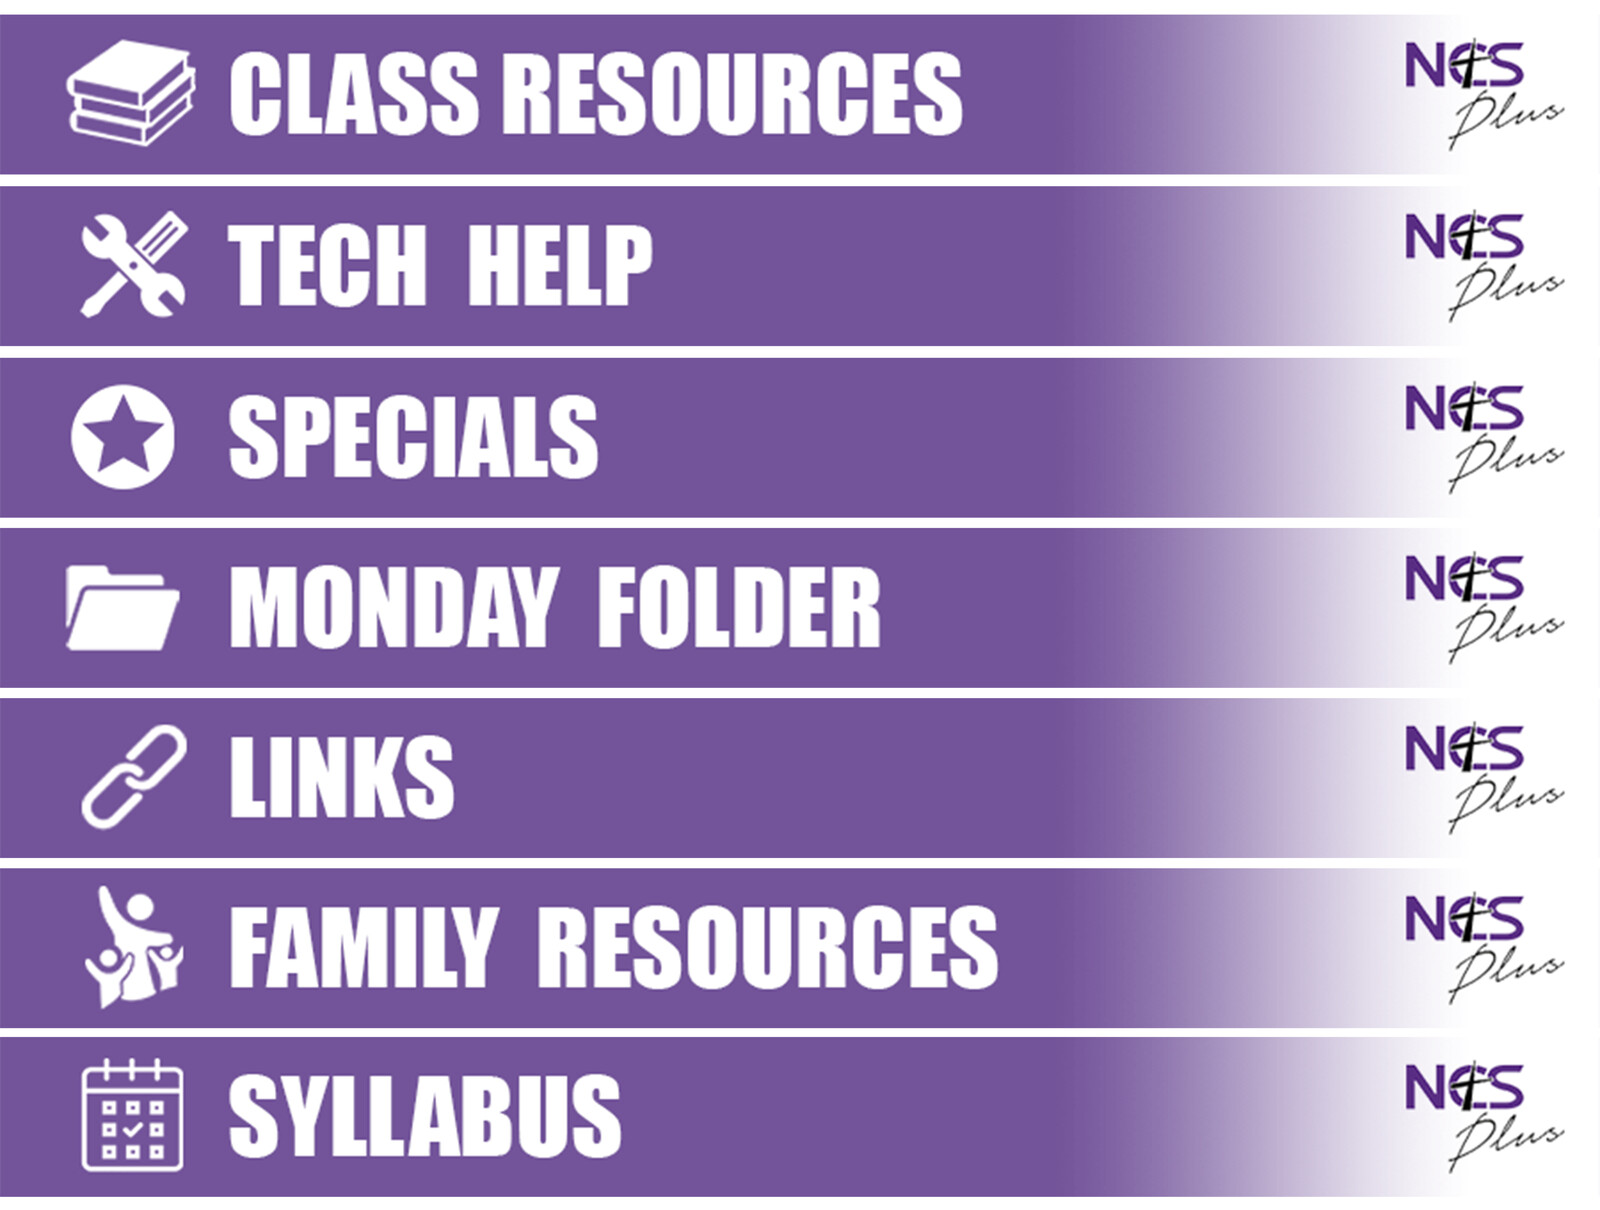 Banners for the new online school portal "NCS Plus"